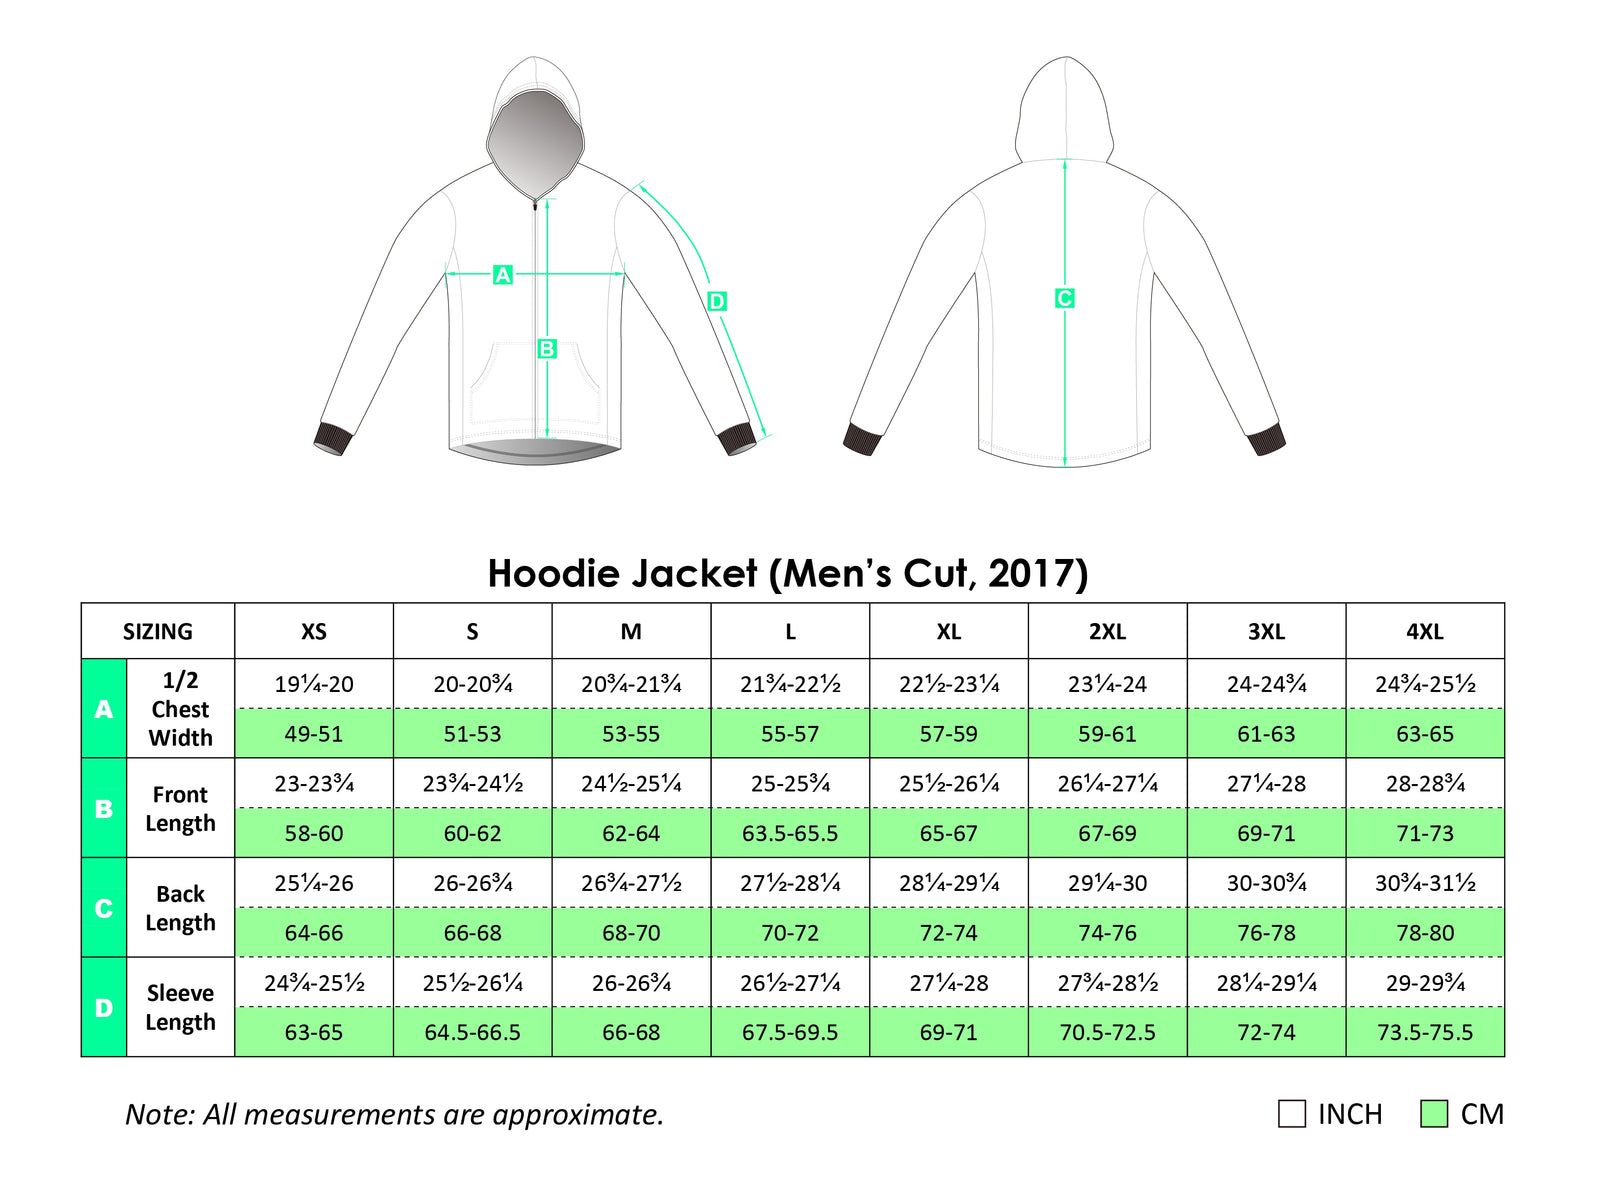 QTRI 2023 Thermal Hoodie Jacket (MENS  cut) with side panels, red cuffs